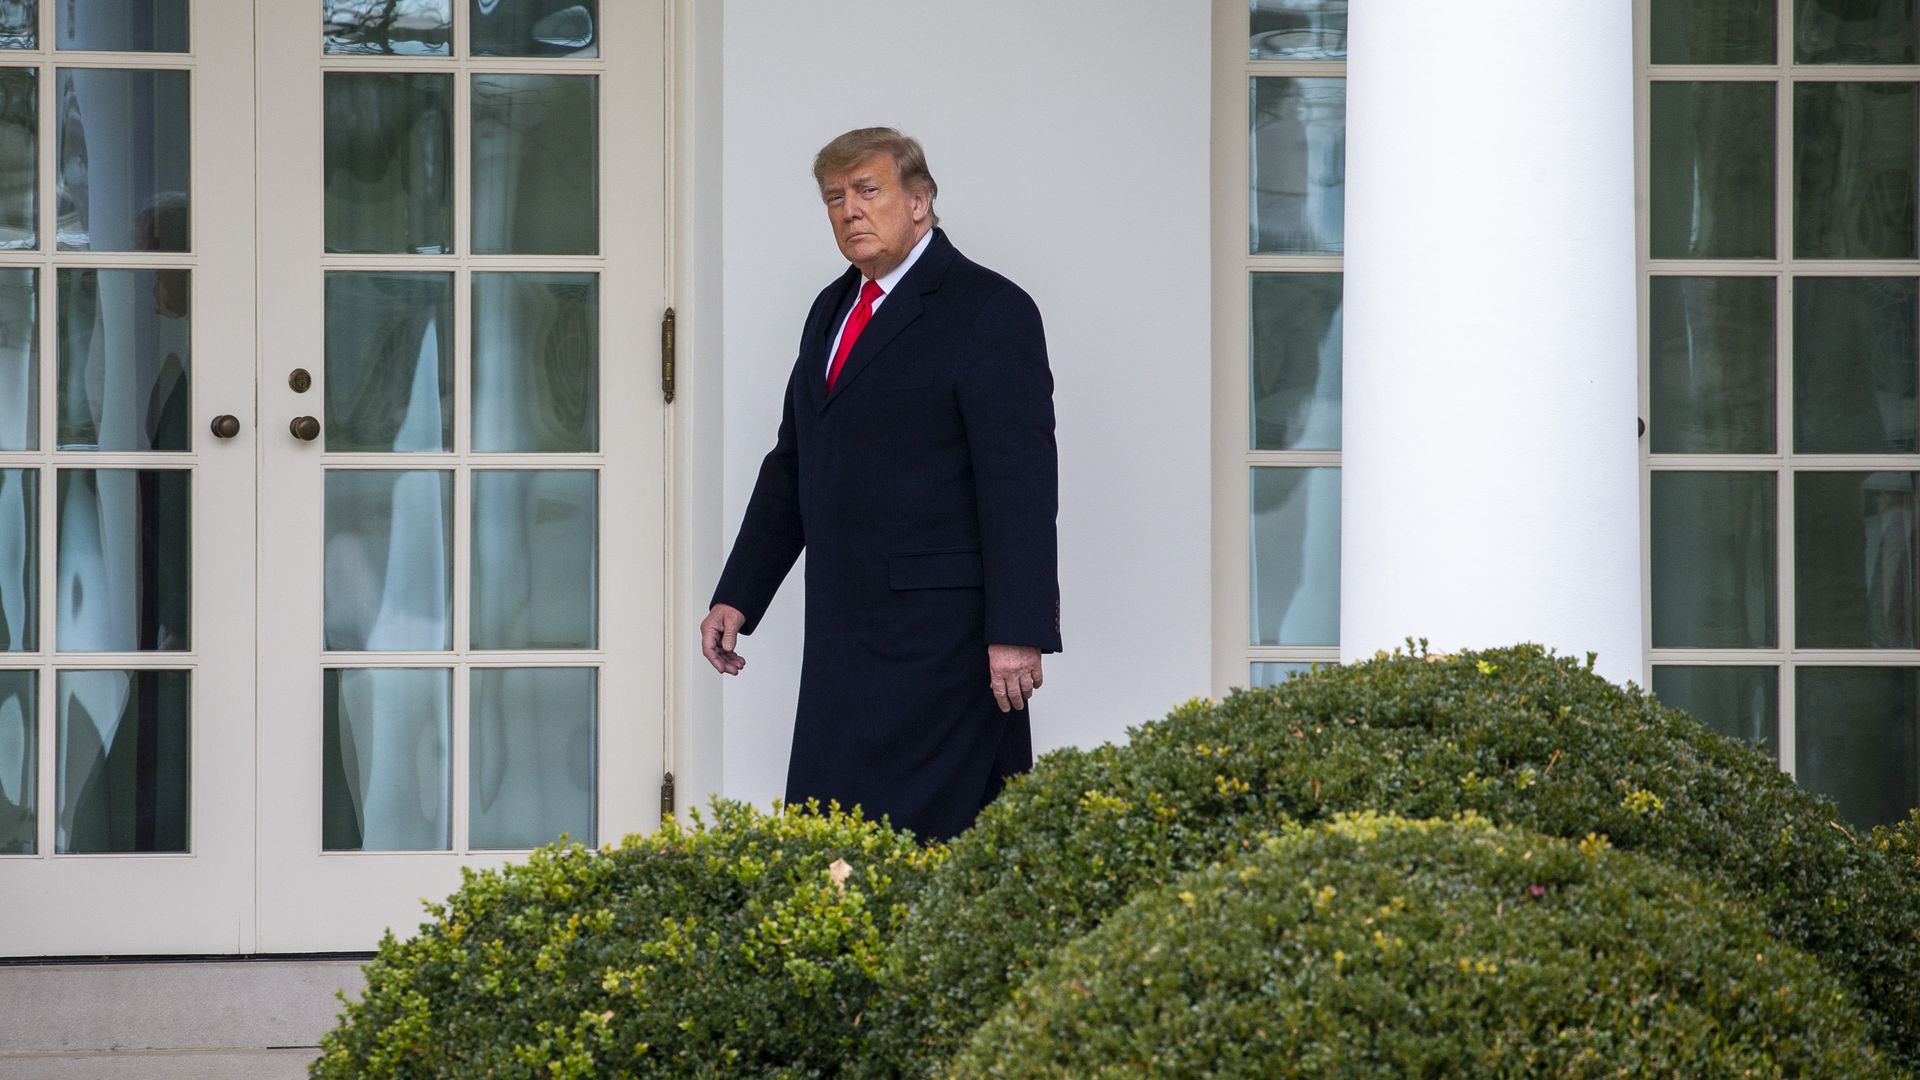 Trump entering the Oval Office on Dec. 31.